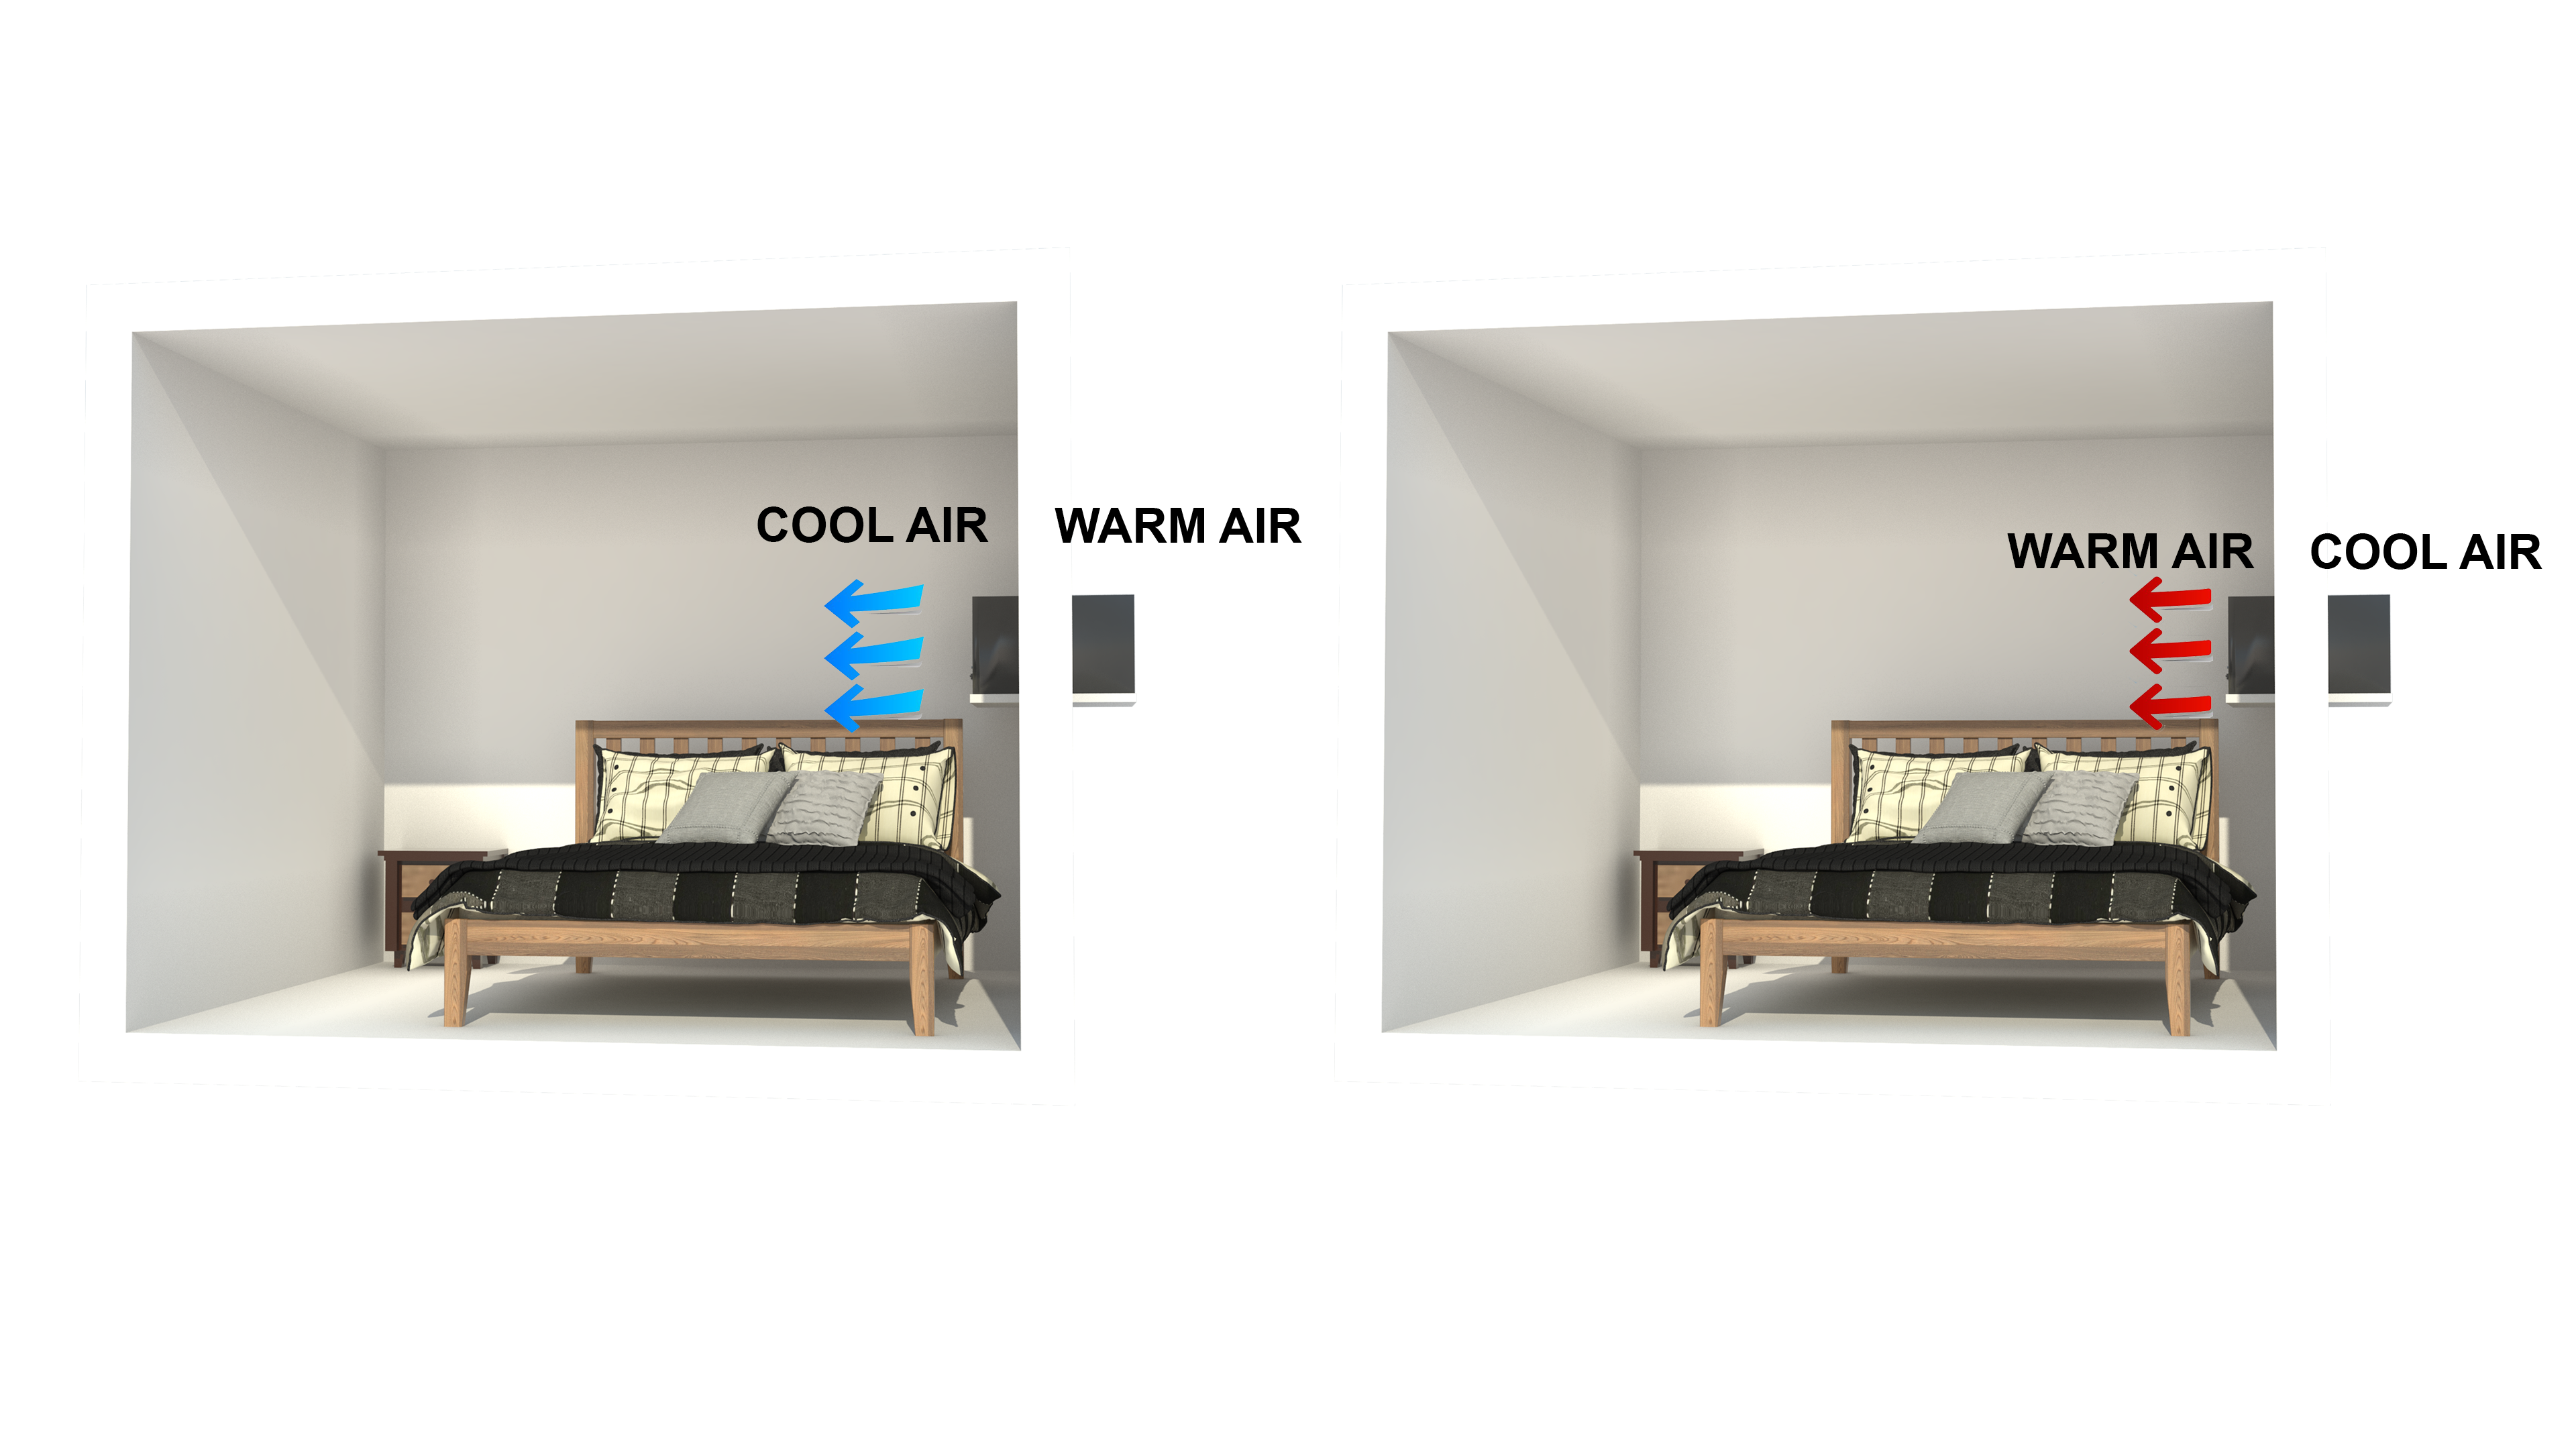 Nature’s Unit works to create a stable atmosphere inside the home with air, fans, and heat controlling the temperature automatically without a switch.